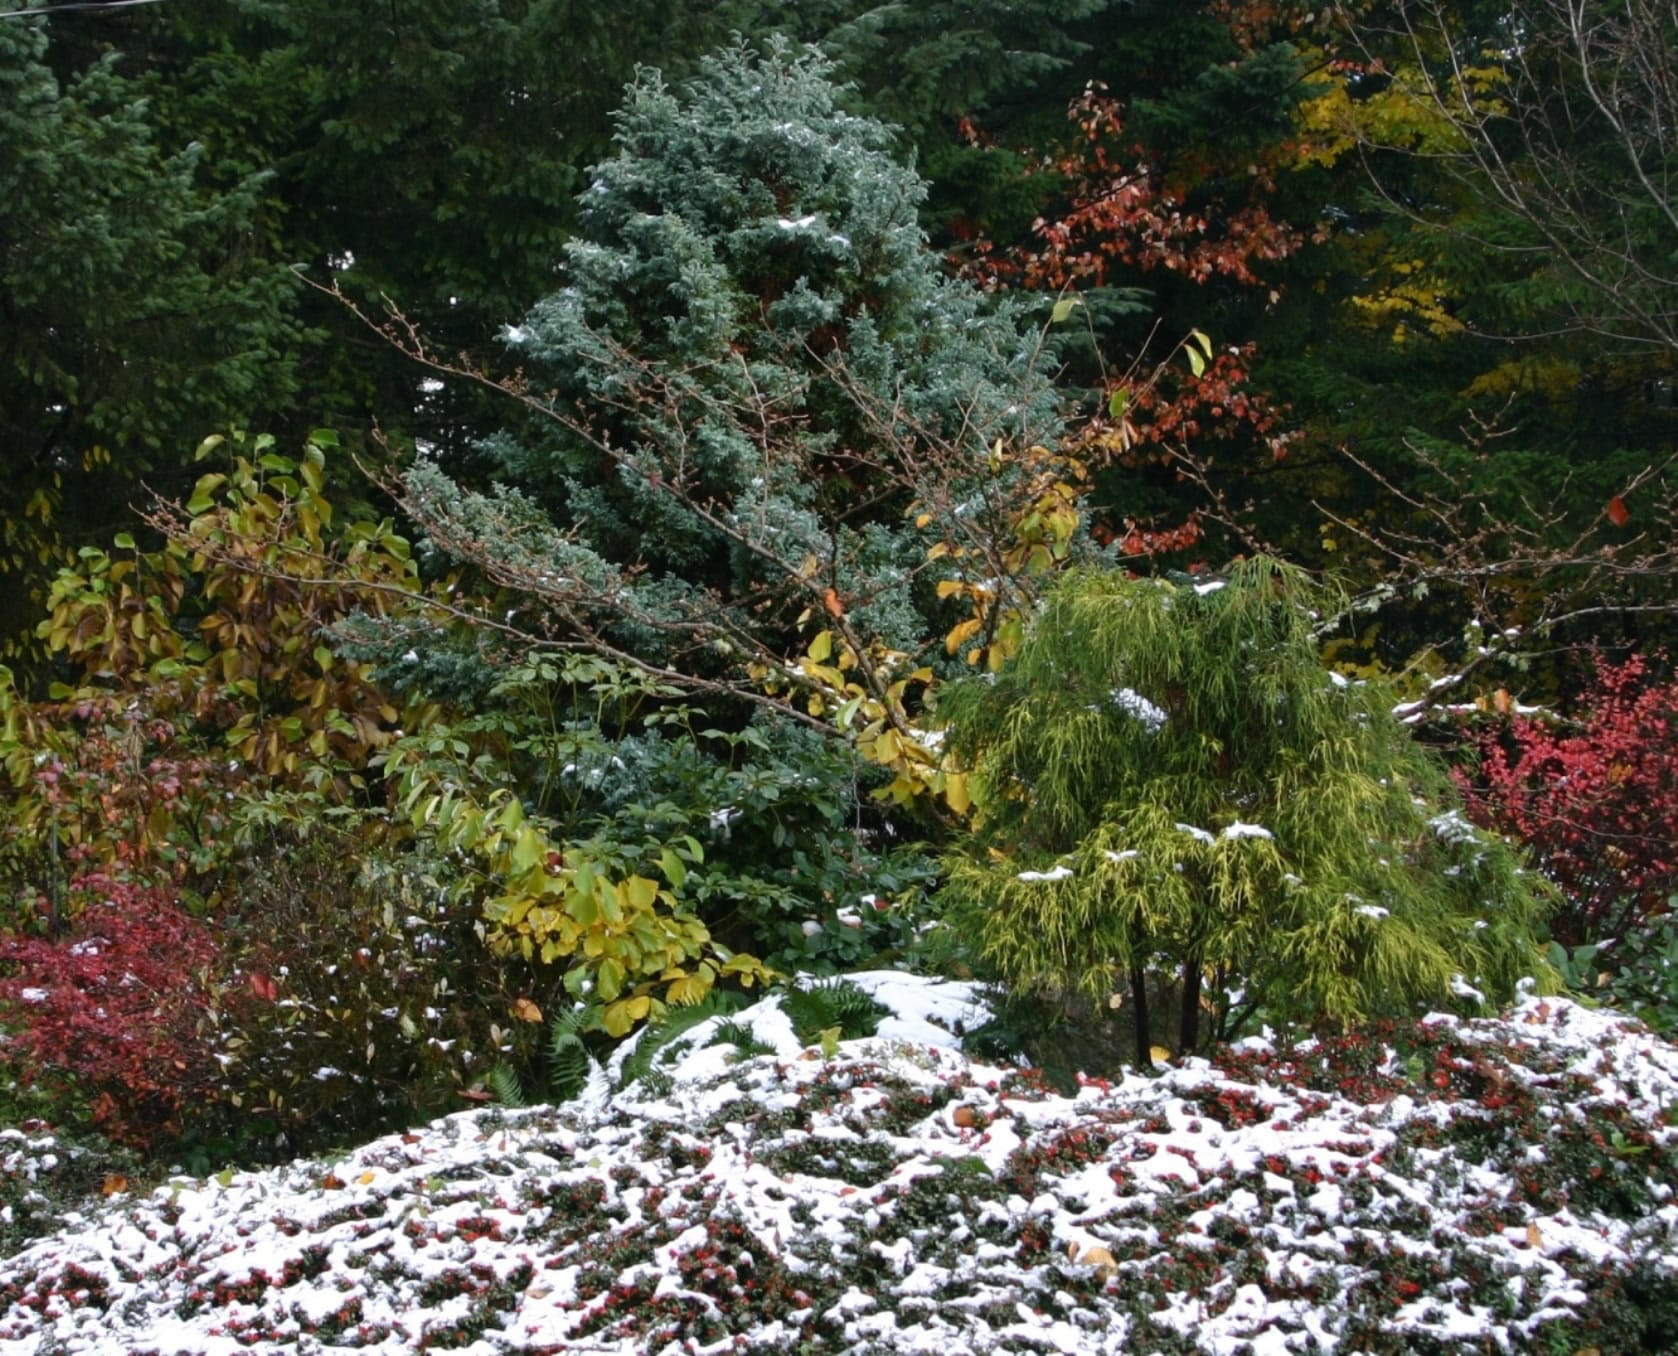 After a cold snap and a light dusting of snow, evergreens stand out in the winter landscape.